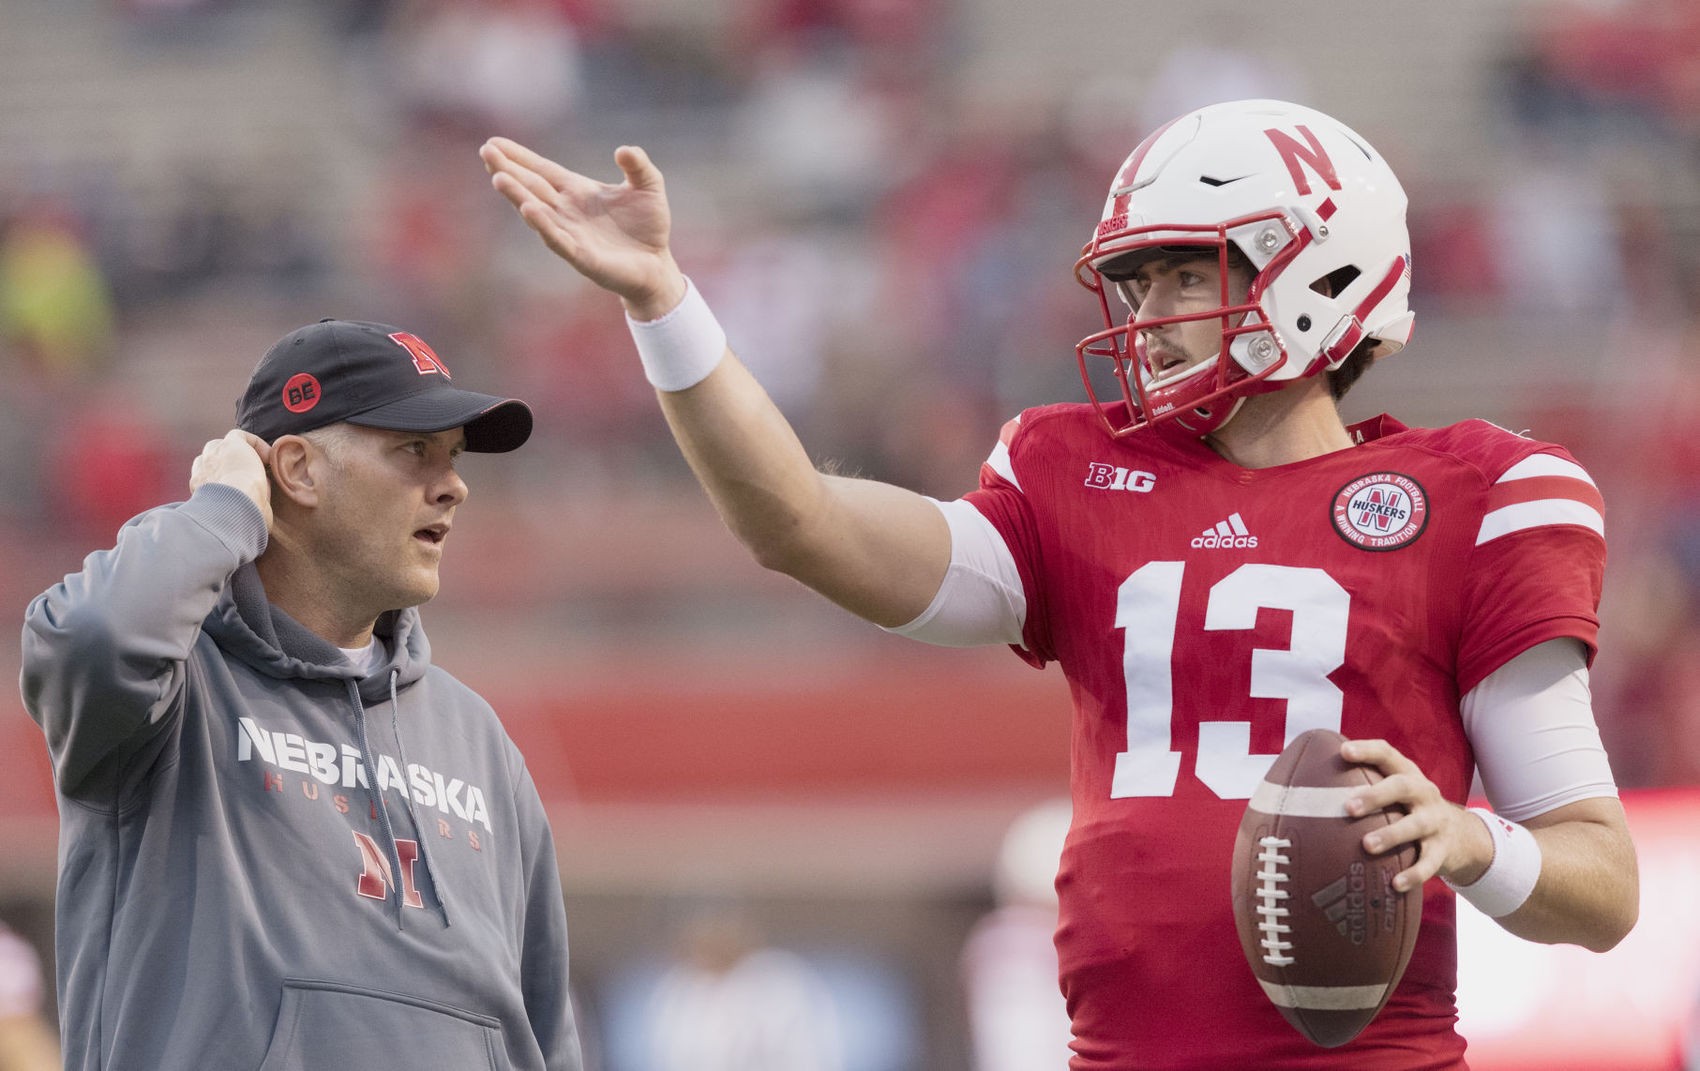 Huskers' Tanner Lee will enter the NFL Draft